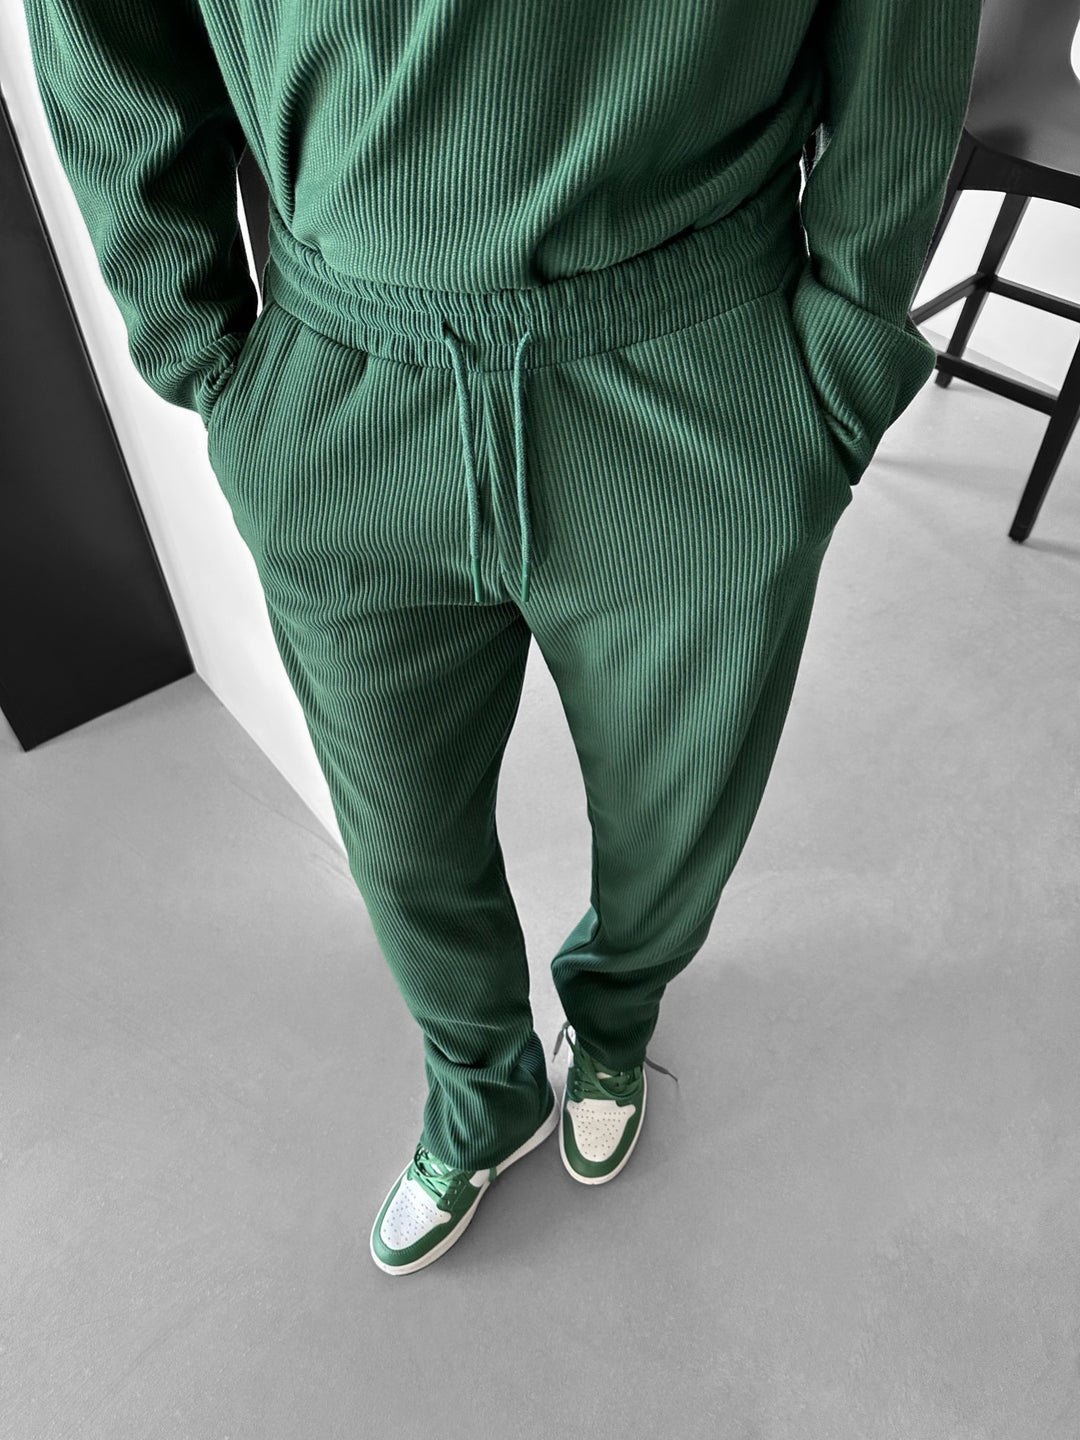 Loose Fit Cord Pant - Forest Green